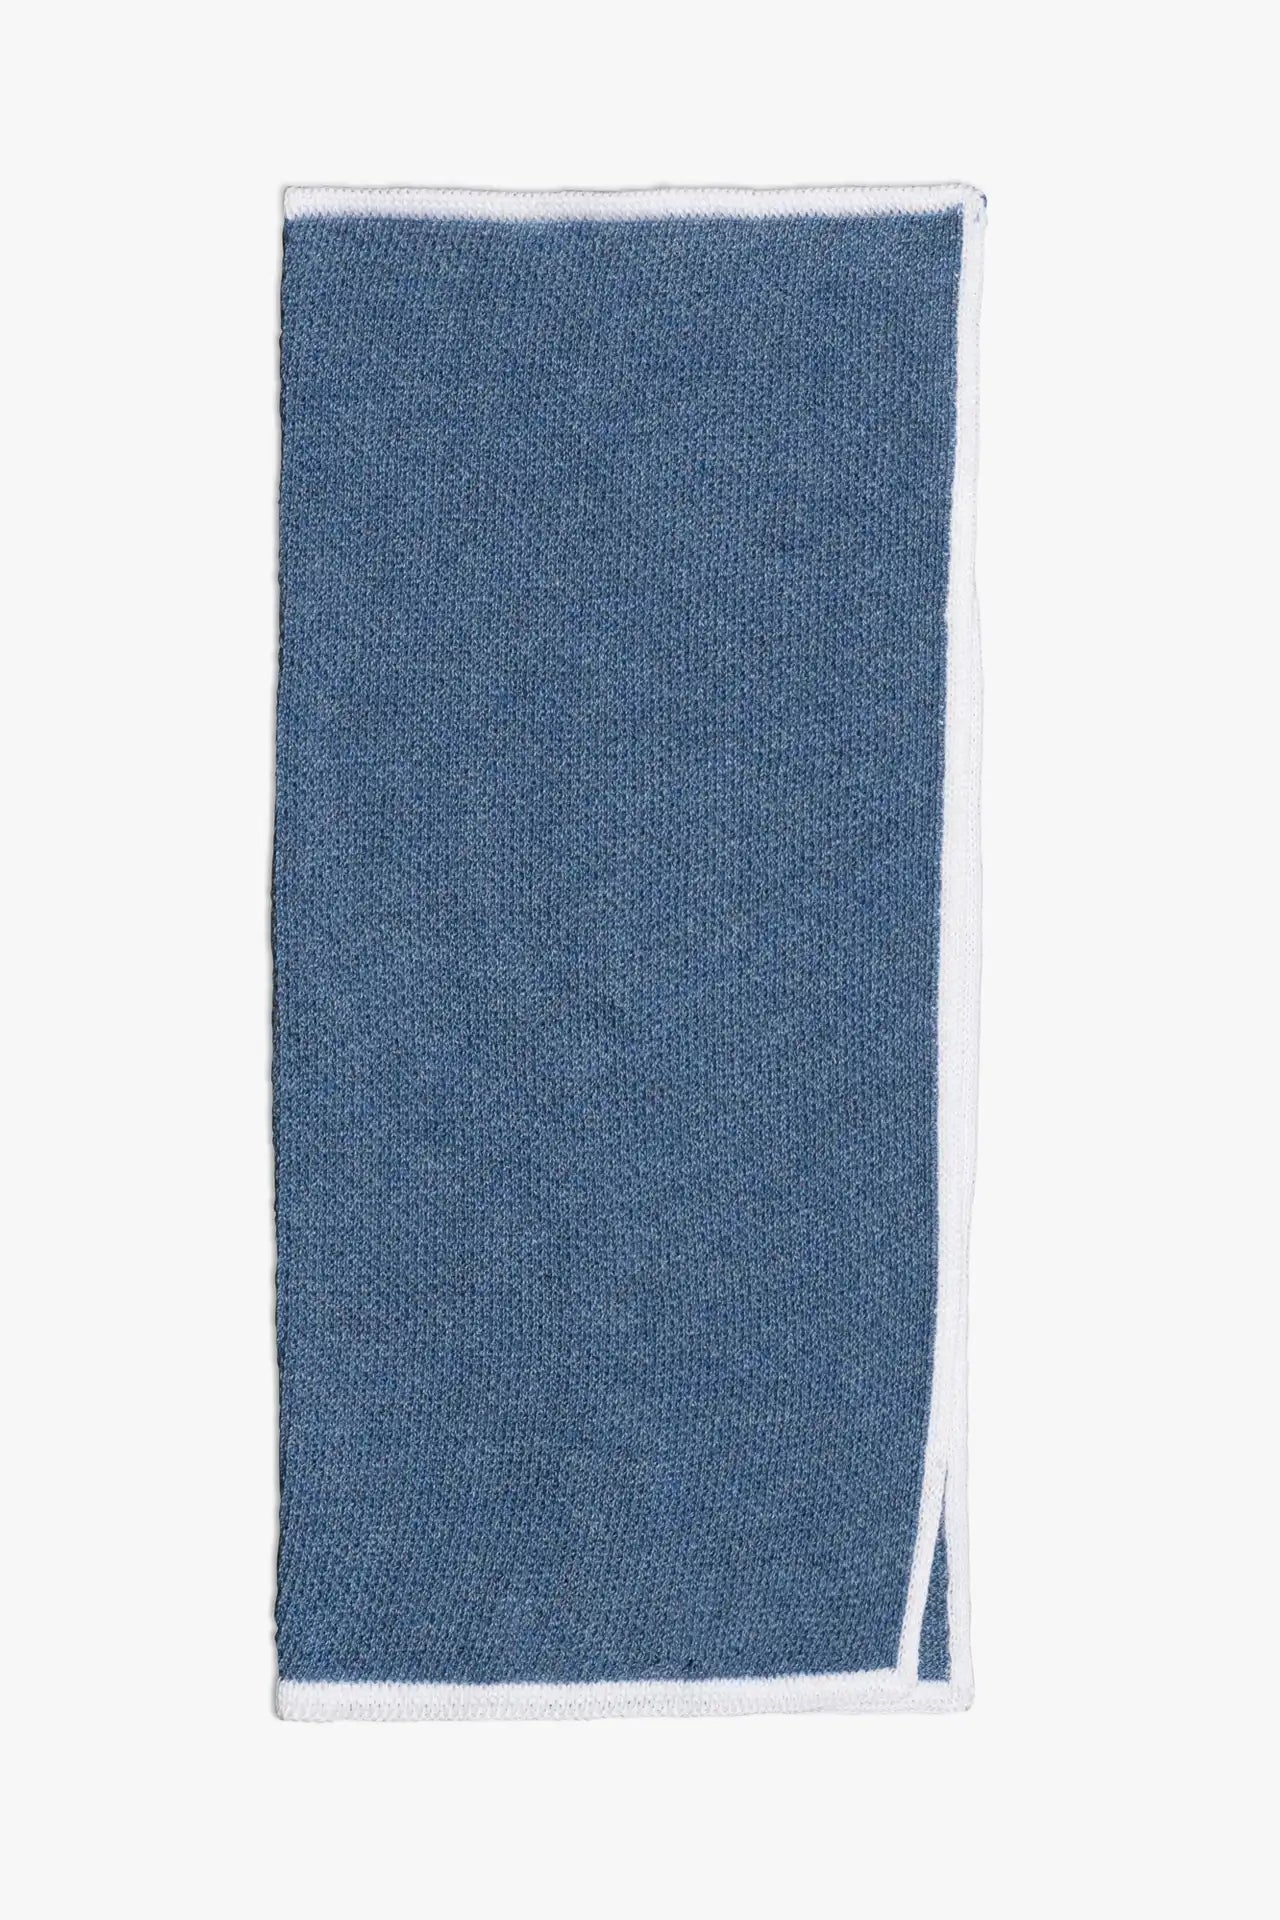 Blue knitted pocket square with white boarder in knitted cotton 